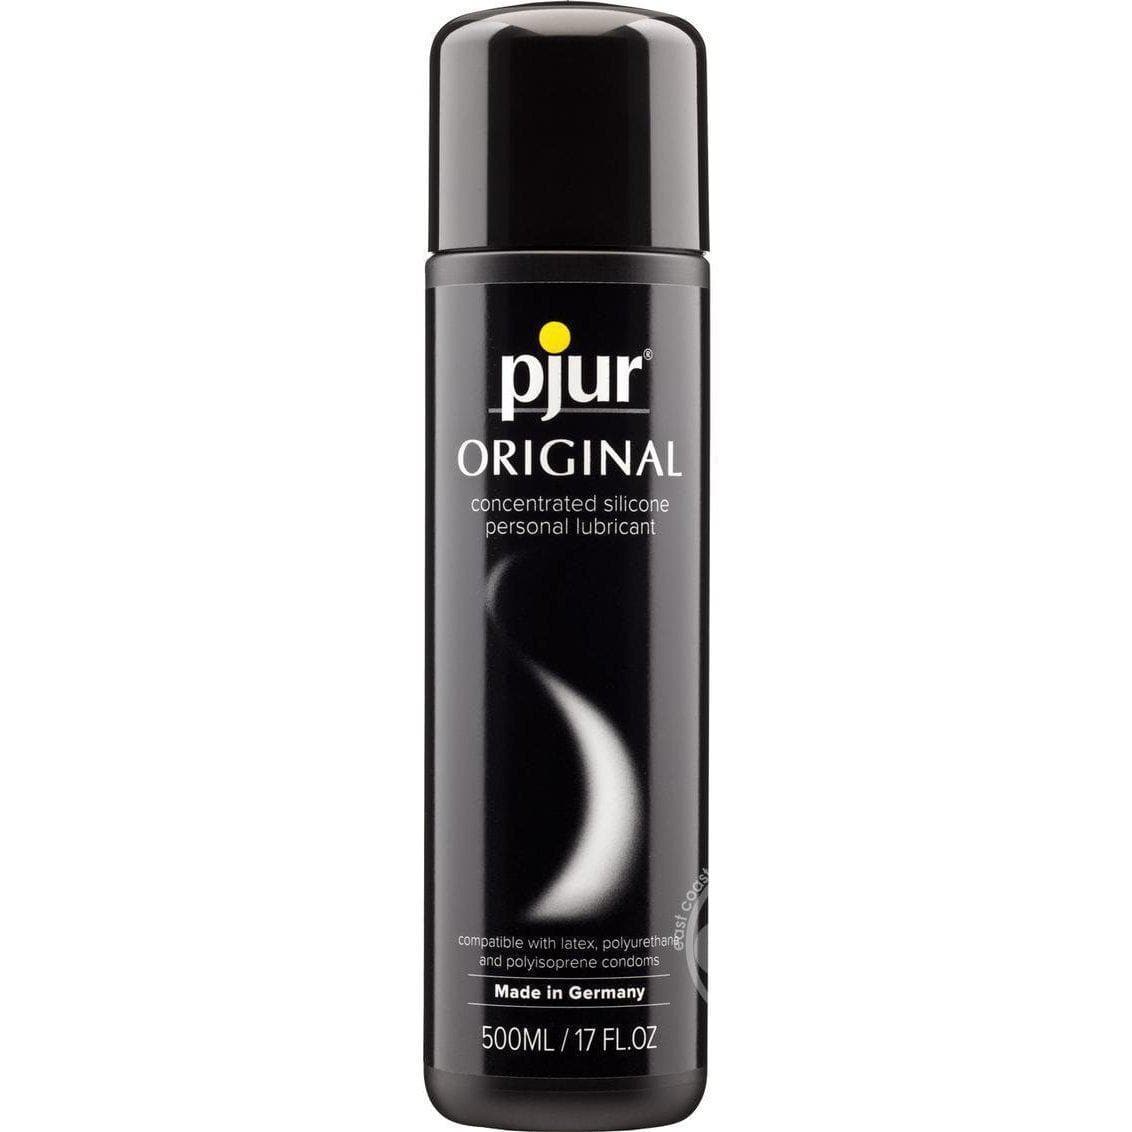 Pjur Eros Original Super Concentrated Bodyglide Silicone Personal Lubricant - Romantic Blessings